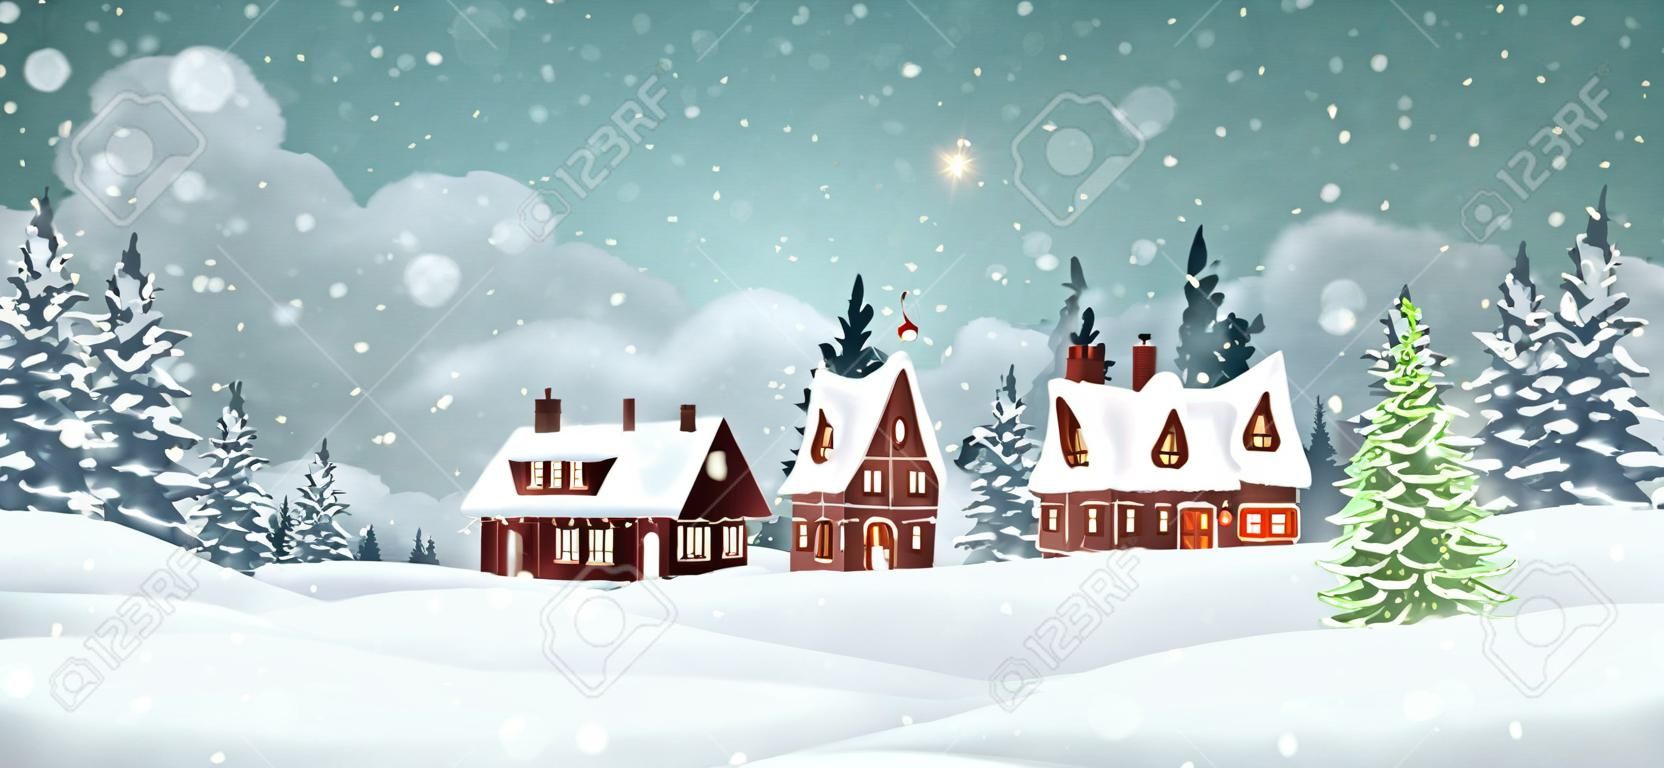 Christmas village houses with winter pine forest. Christmas holidays vector illustration